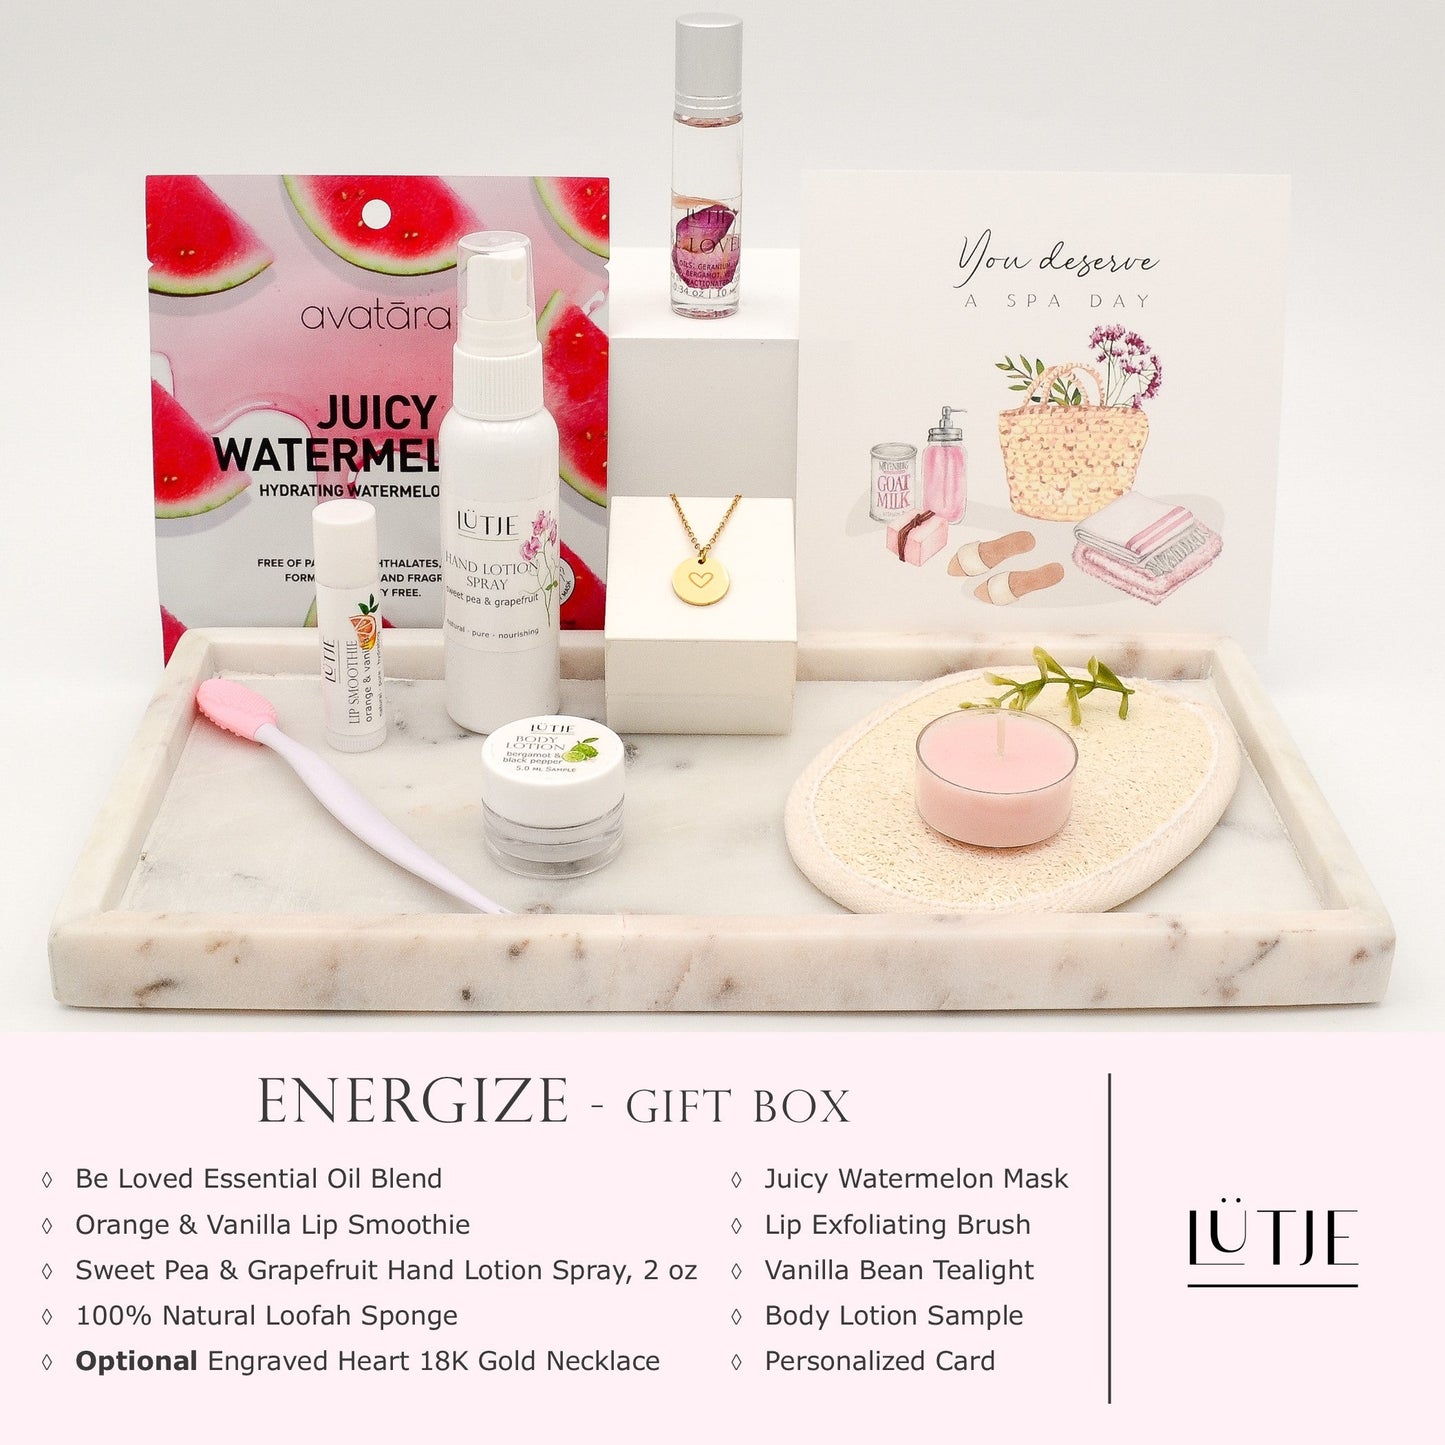 Energize Gift Box for women, BFF, wife, daughter, sister, mom, or grandma, includes Sweet Pea & Grapefruit hand lotion spray, essential oil, lip balm, hydrating face mask, other bath, spa and self-care items, and 18K gold-plated necklace with engraved heart.